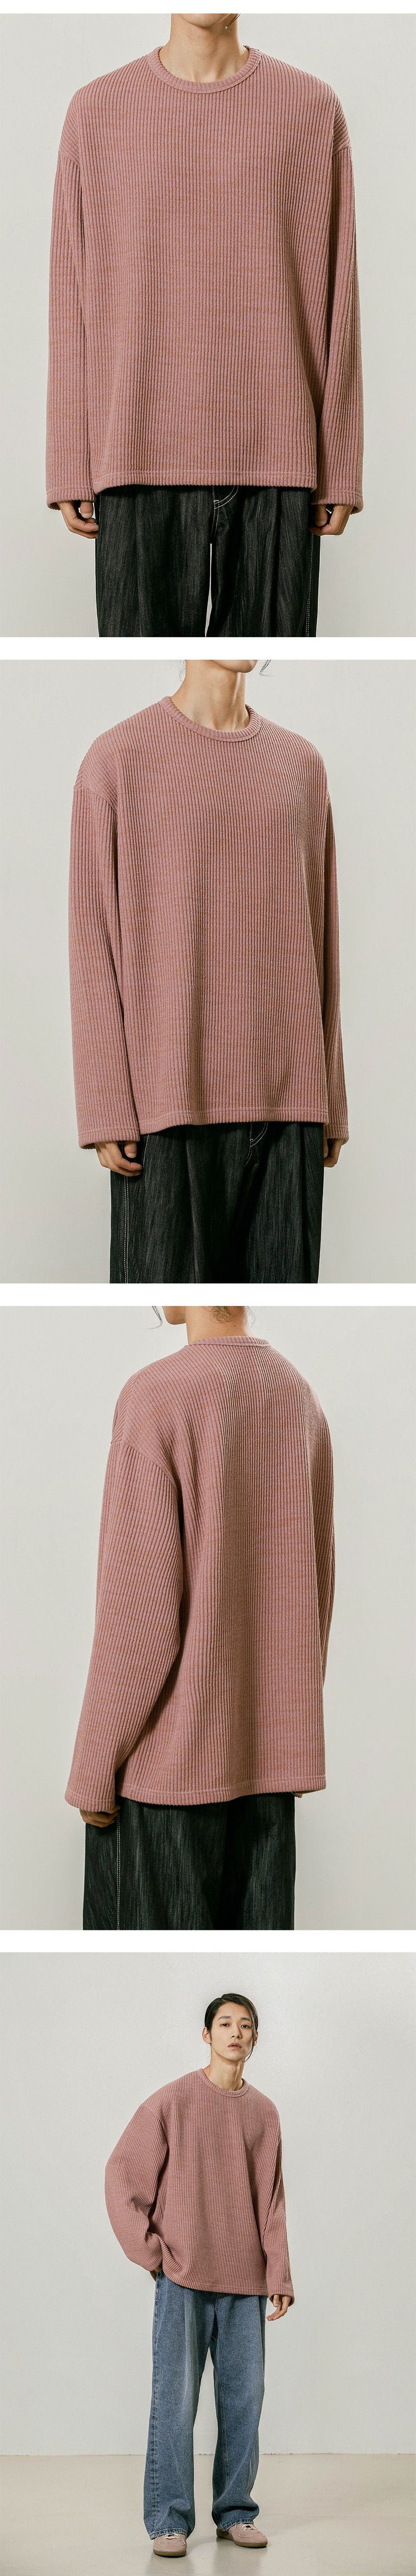 CUT & SEW TEXTURE LONG SLEEVE PALE PINK